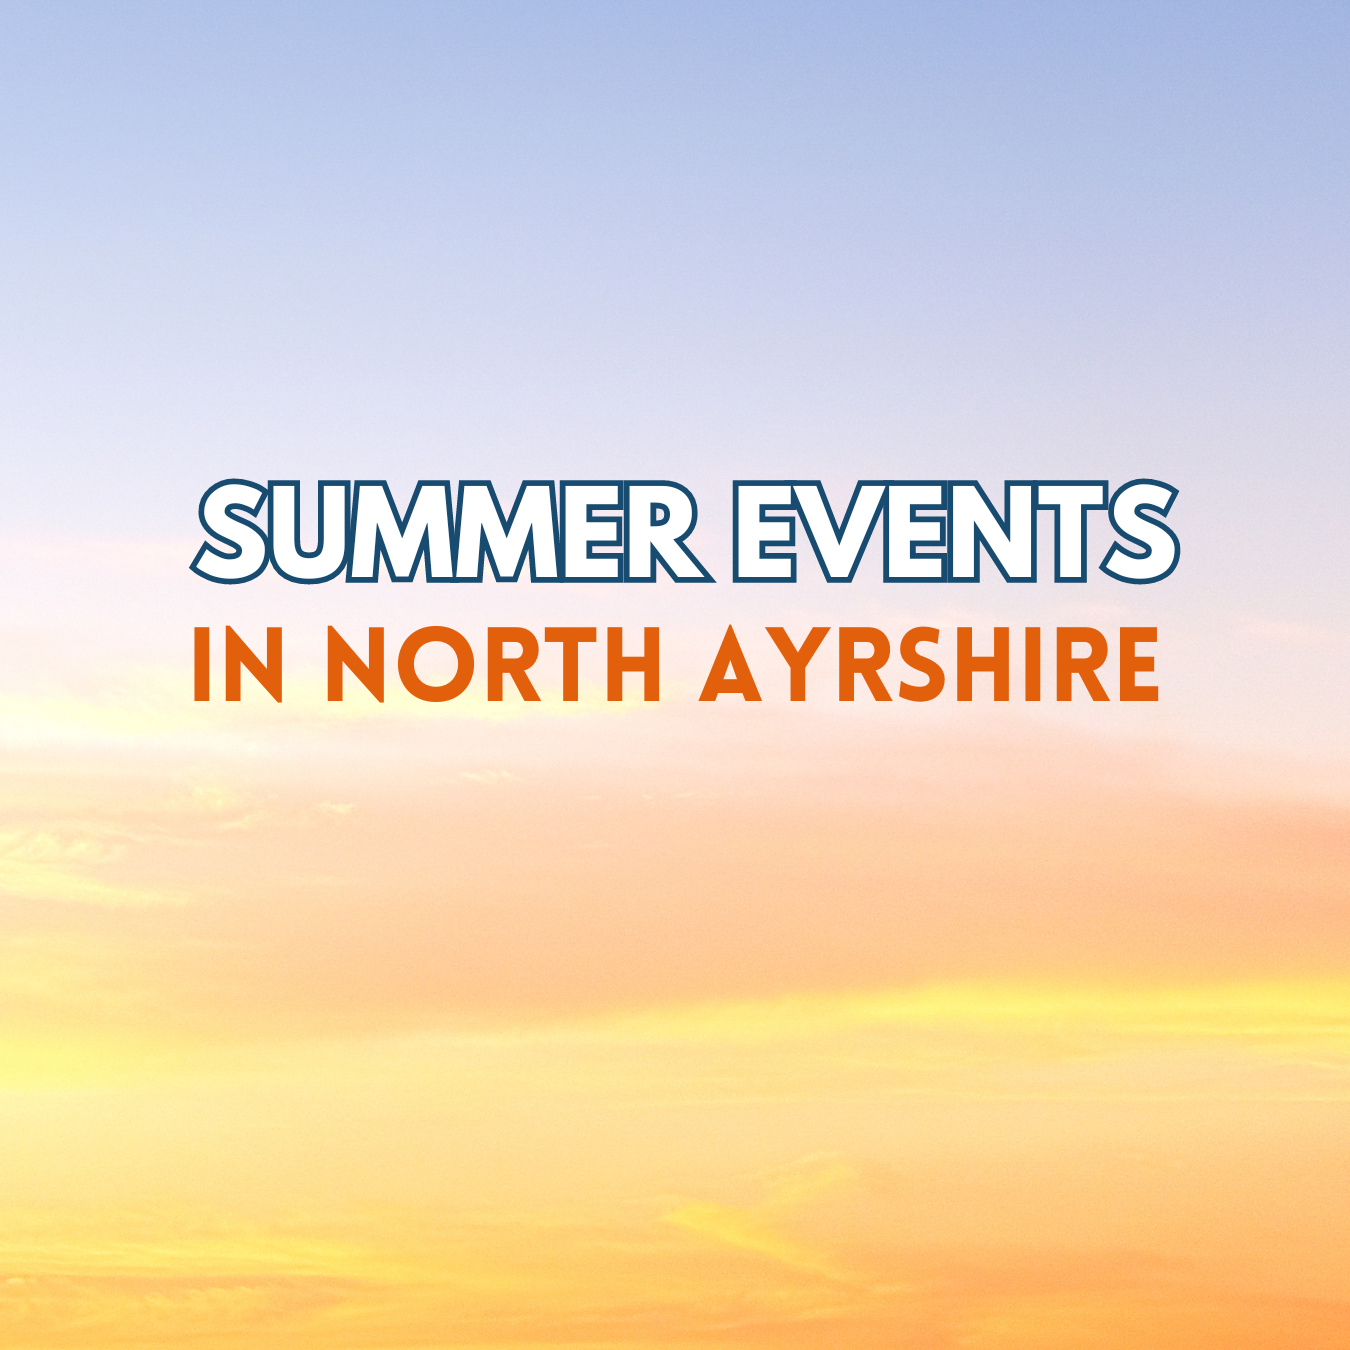 Summer events in North Ayrshire graphic